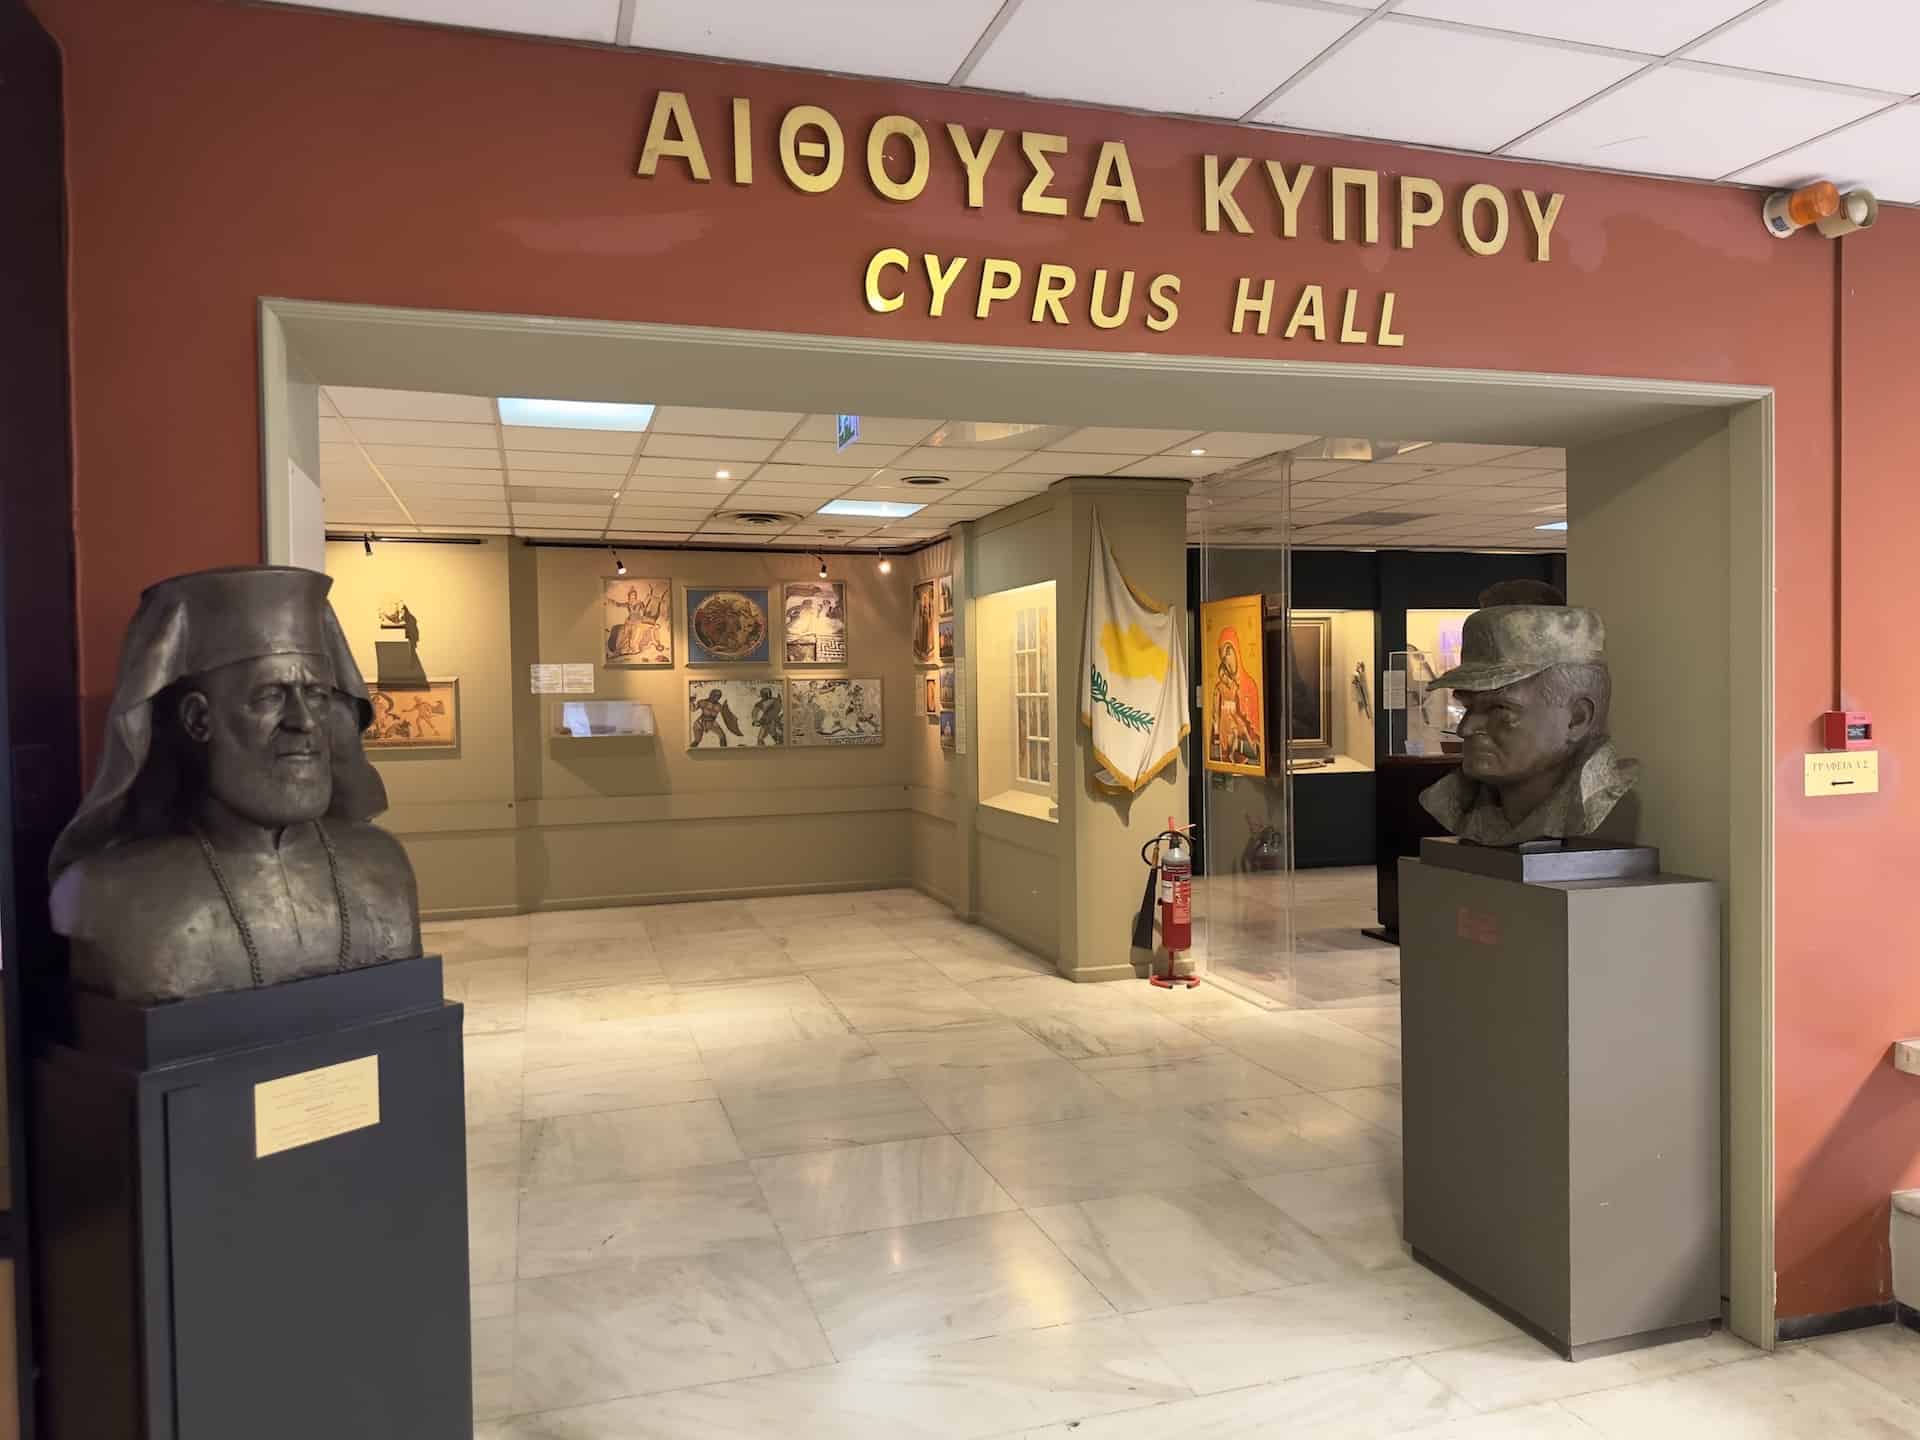 Cyprus Hall at the War Museum in Athens, Greece